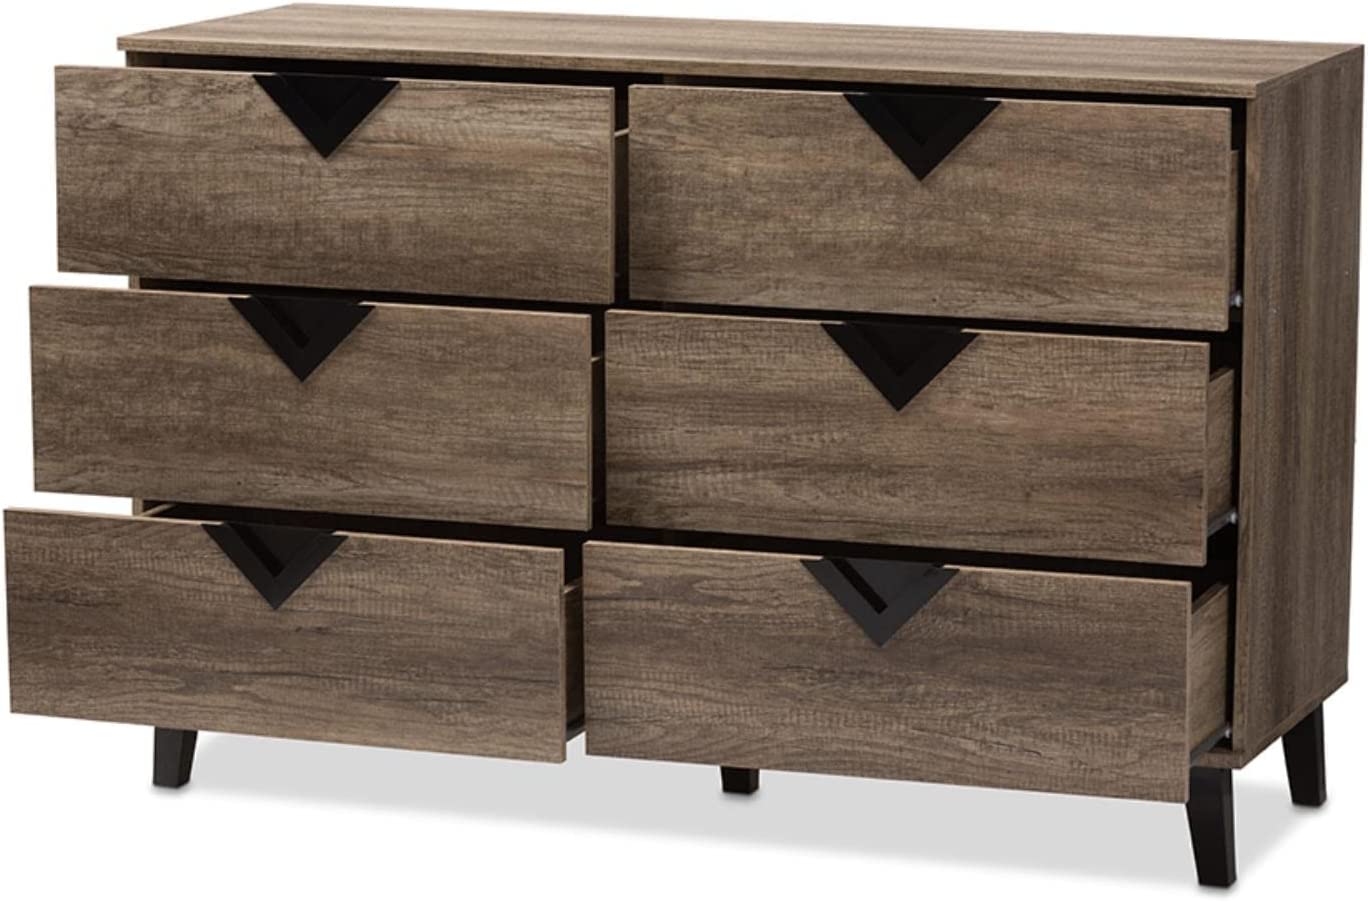 Baxton Studio Wales Modern and Contemporary Light Brown Wood 6-Drawer Chest